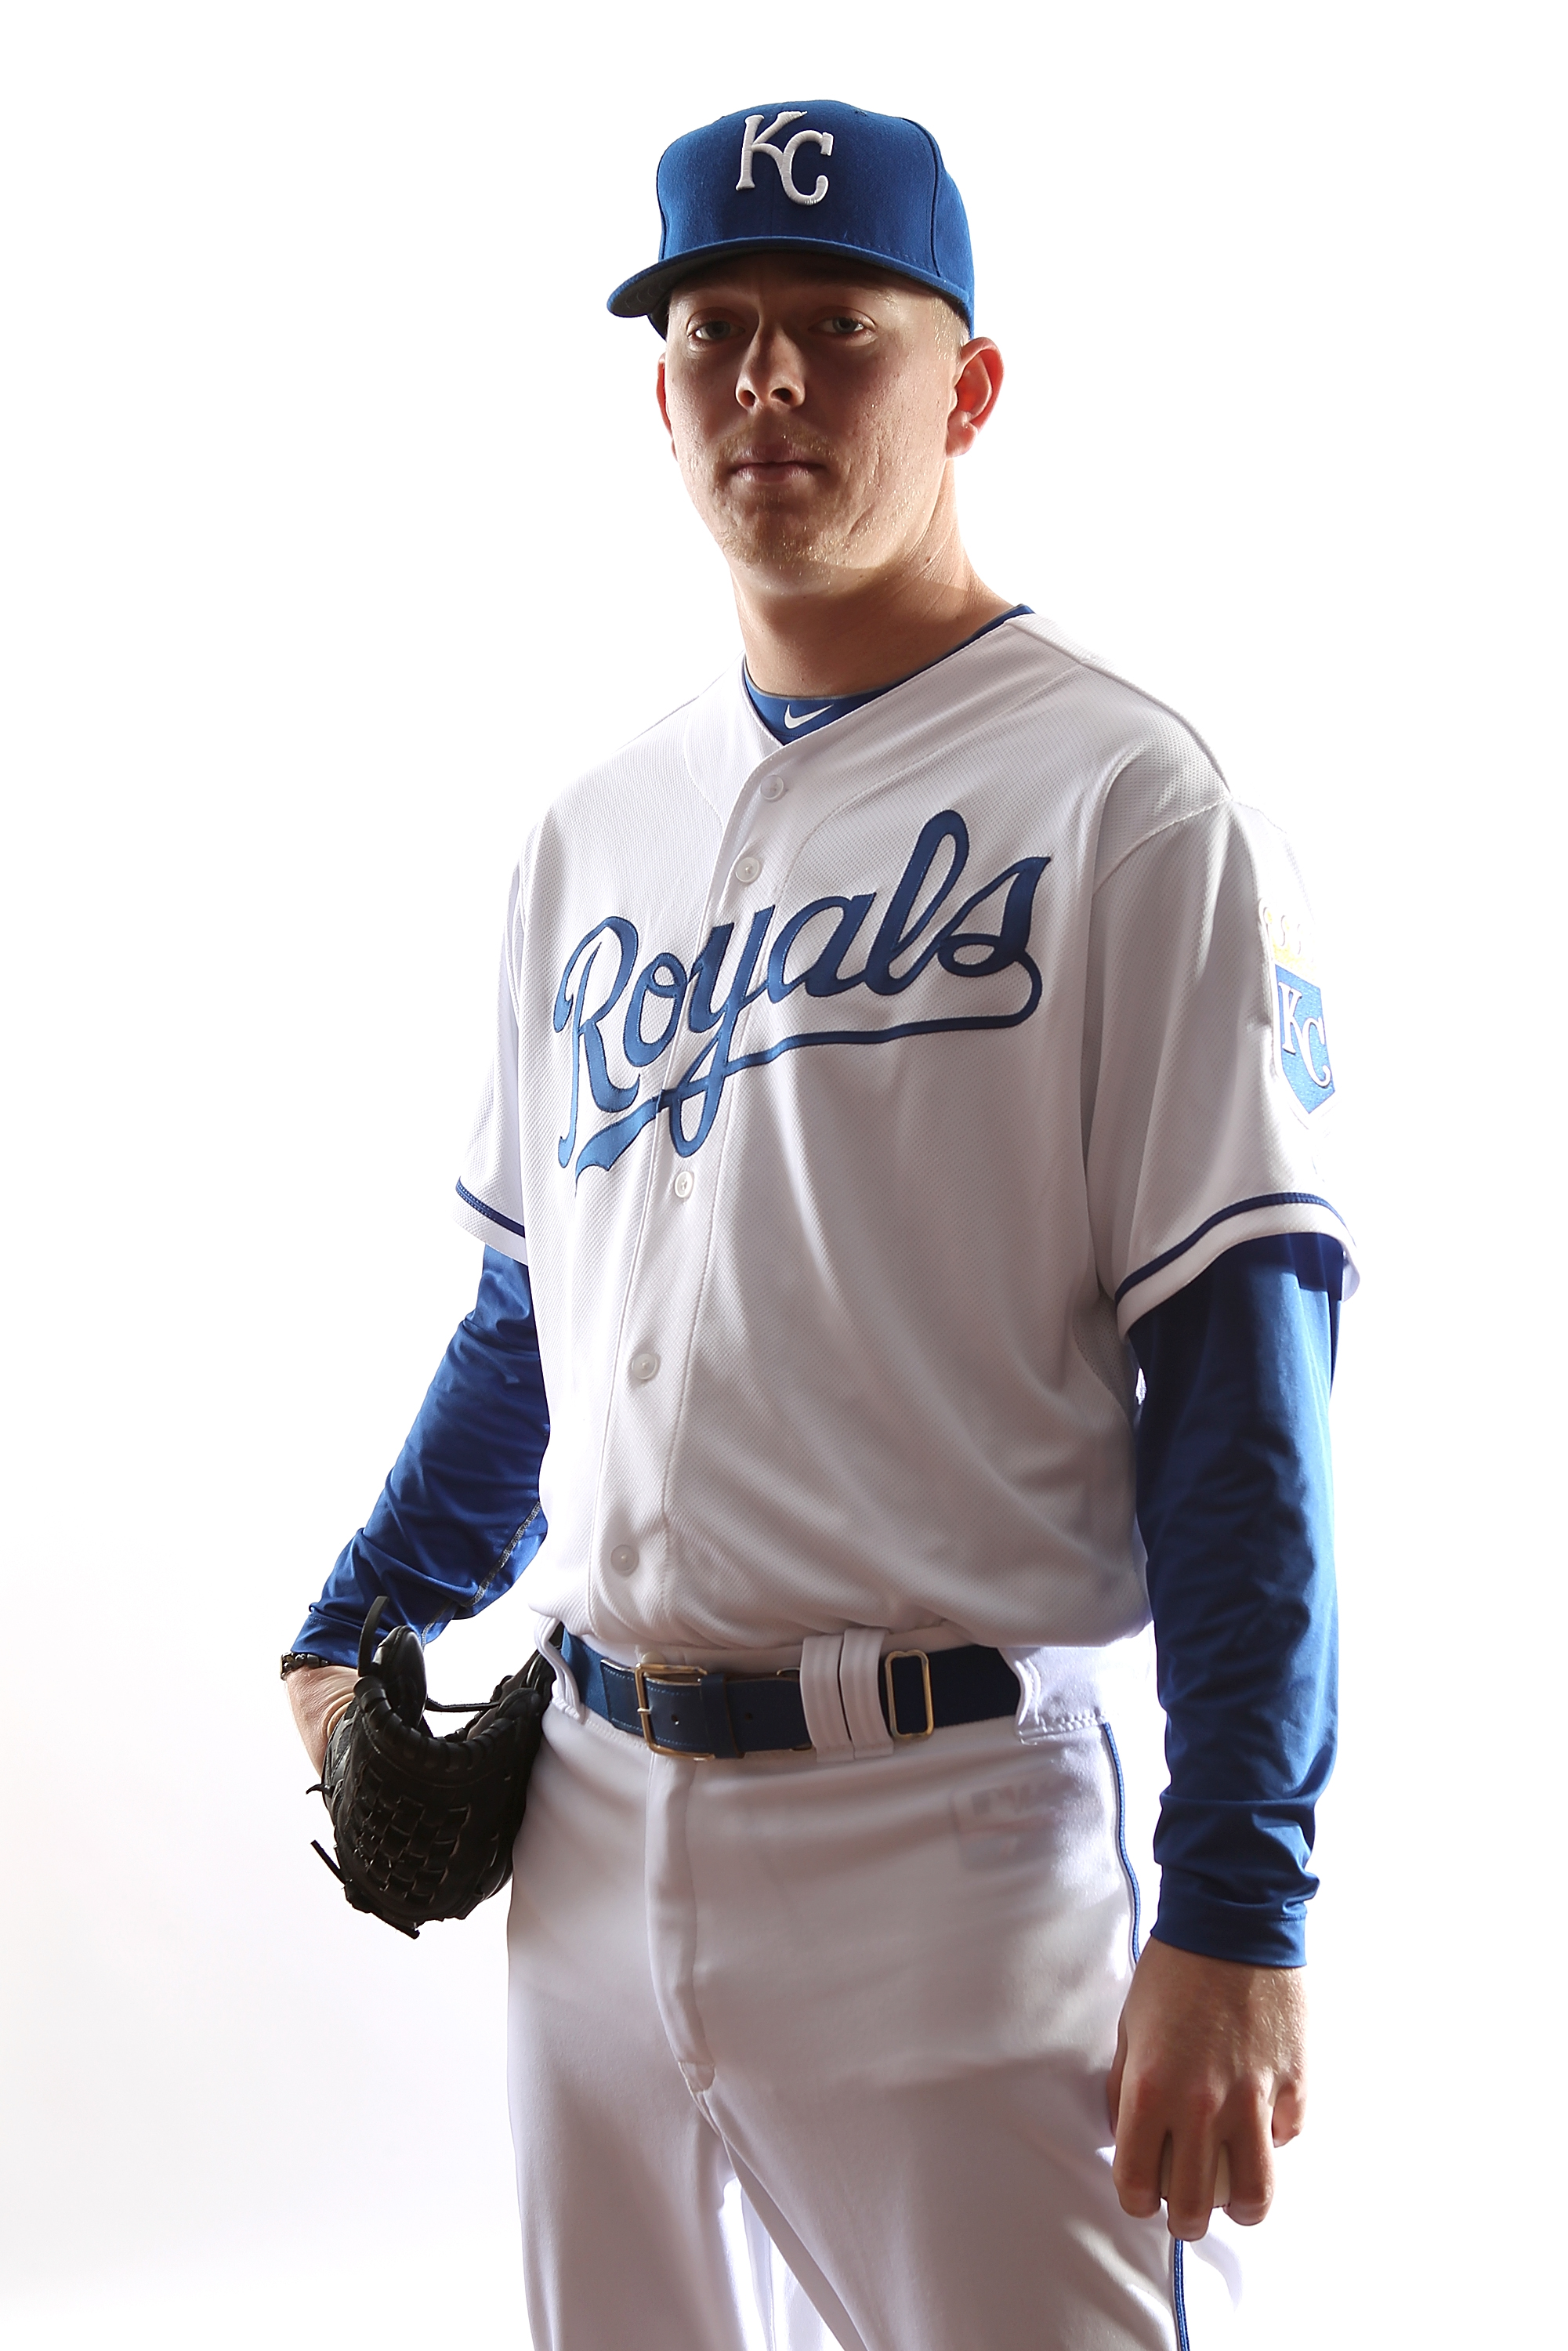 SURPRISE, AZ - FEBRUARY 23:  John Lamb # 66 of the Kansas City Royals poses for a portrait during Spring Training Media Day on February 23, 2011 at Surprise Stadium in Surprise, Arizona..  (Photo by Jonathan Ferrey/Getty Images)